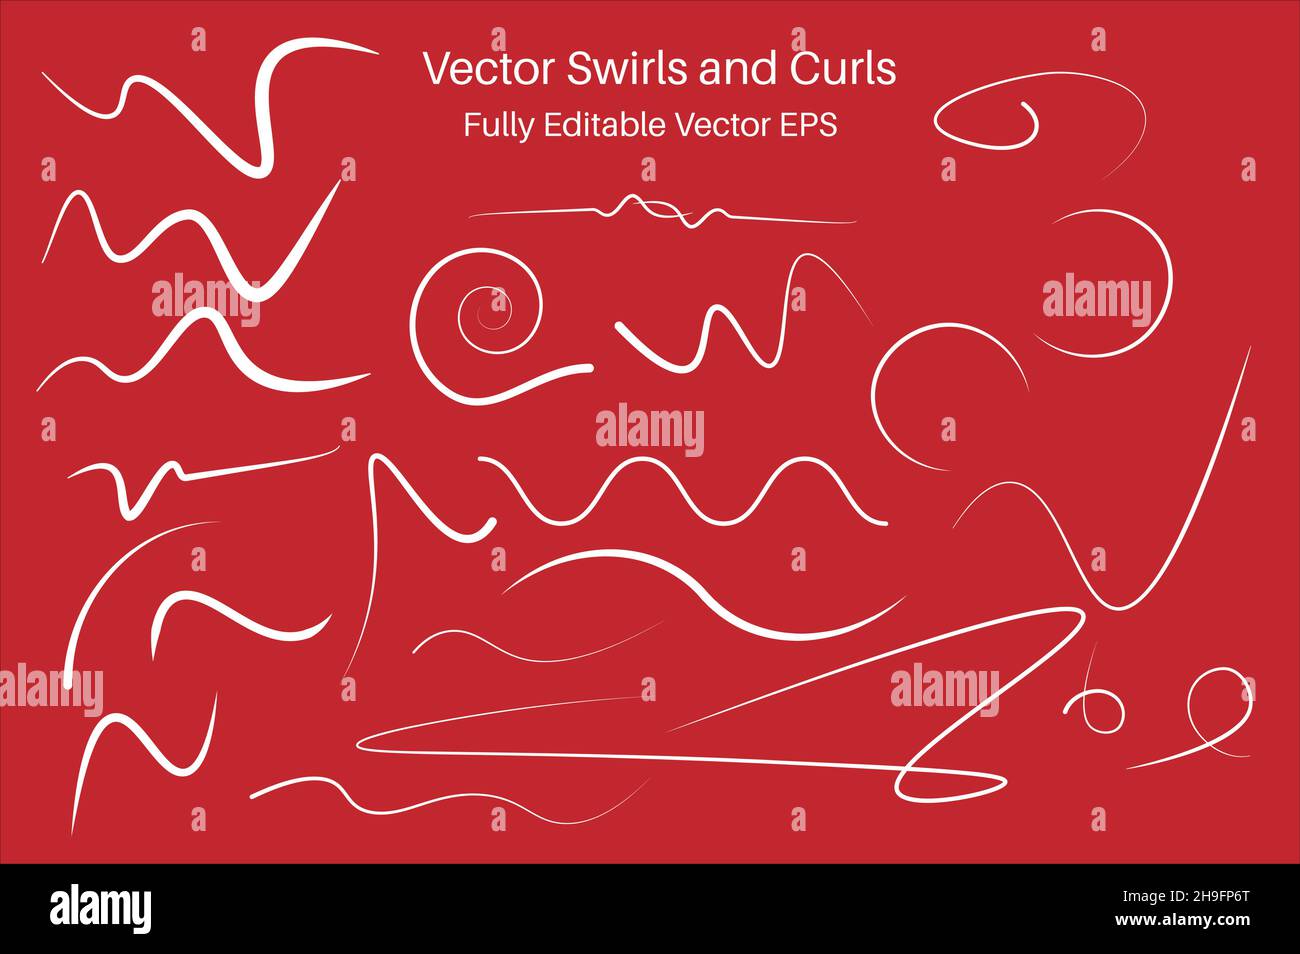 Set of hand drawn swashes, swirls and curls isolated on red background. Fully Editable resources for your project Vector EPS format. Stock Vector